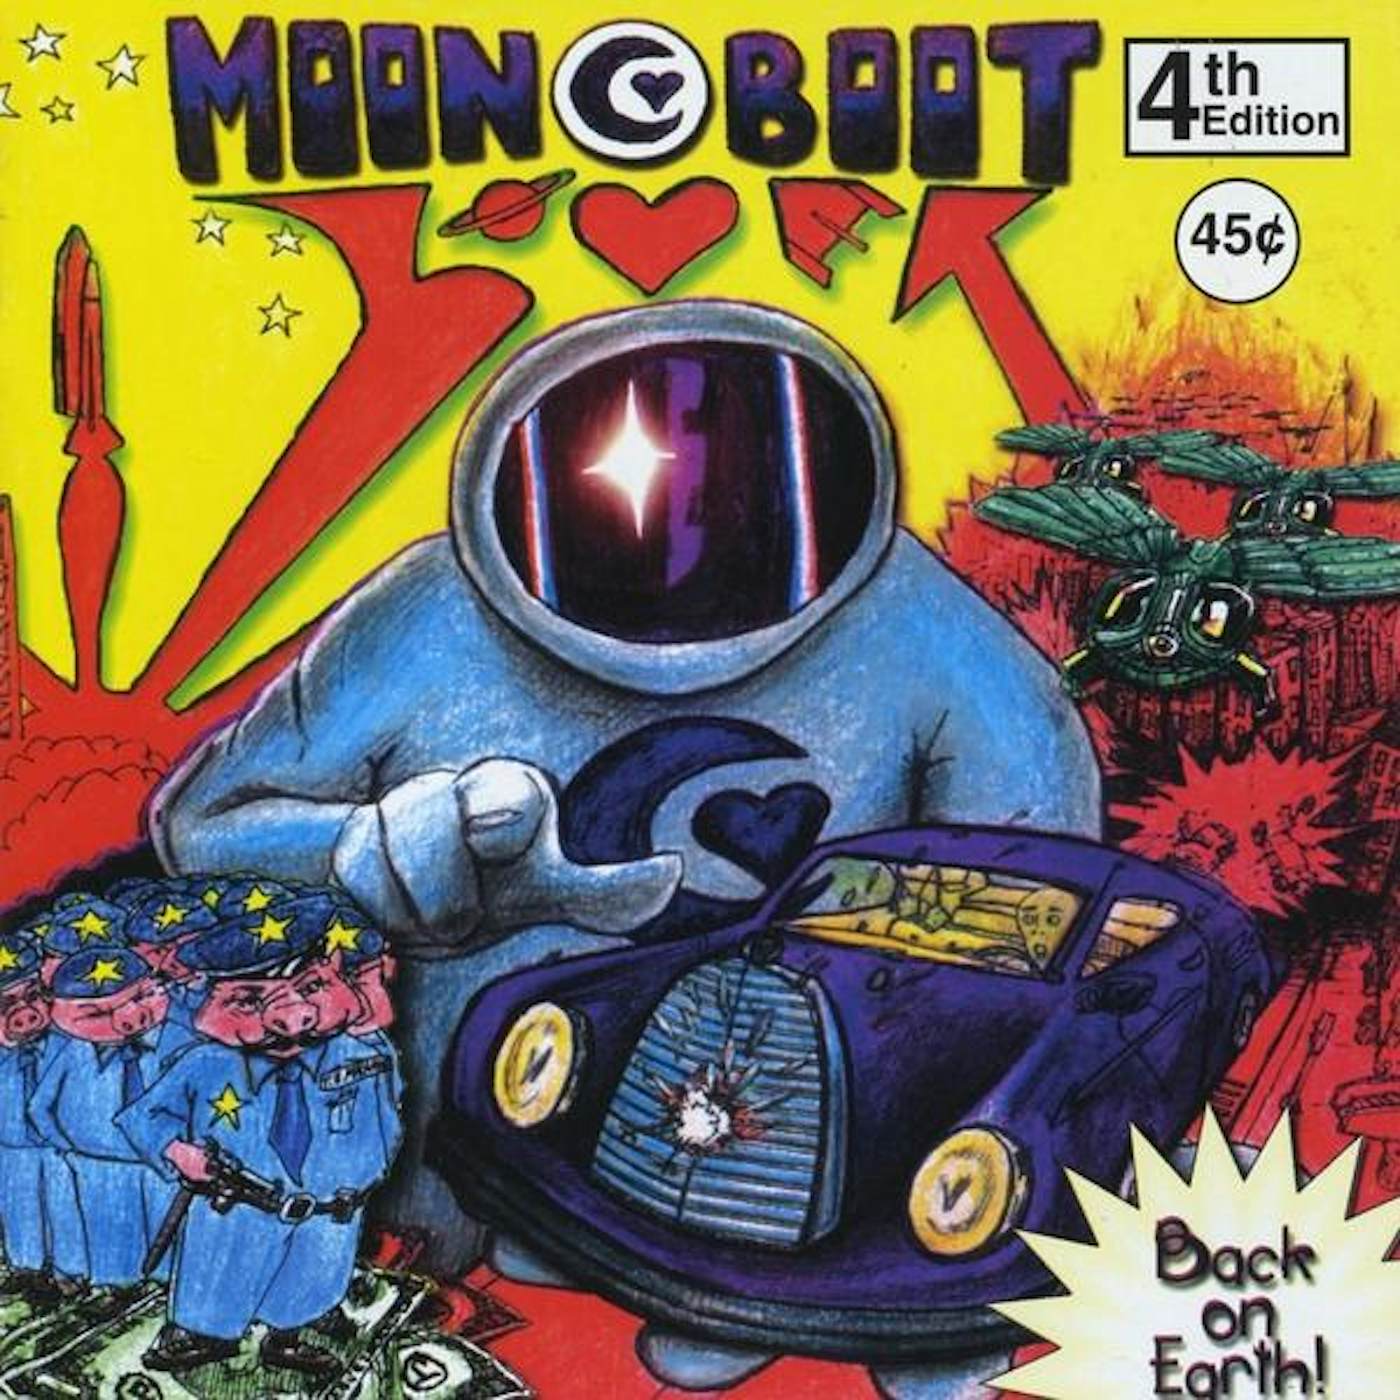 Moon Boot Lover BACK ON EARTH CD